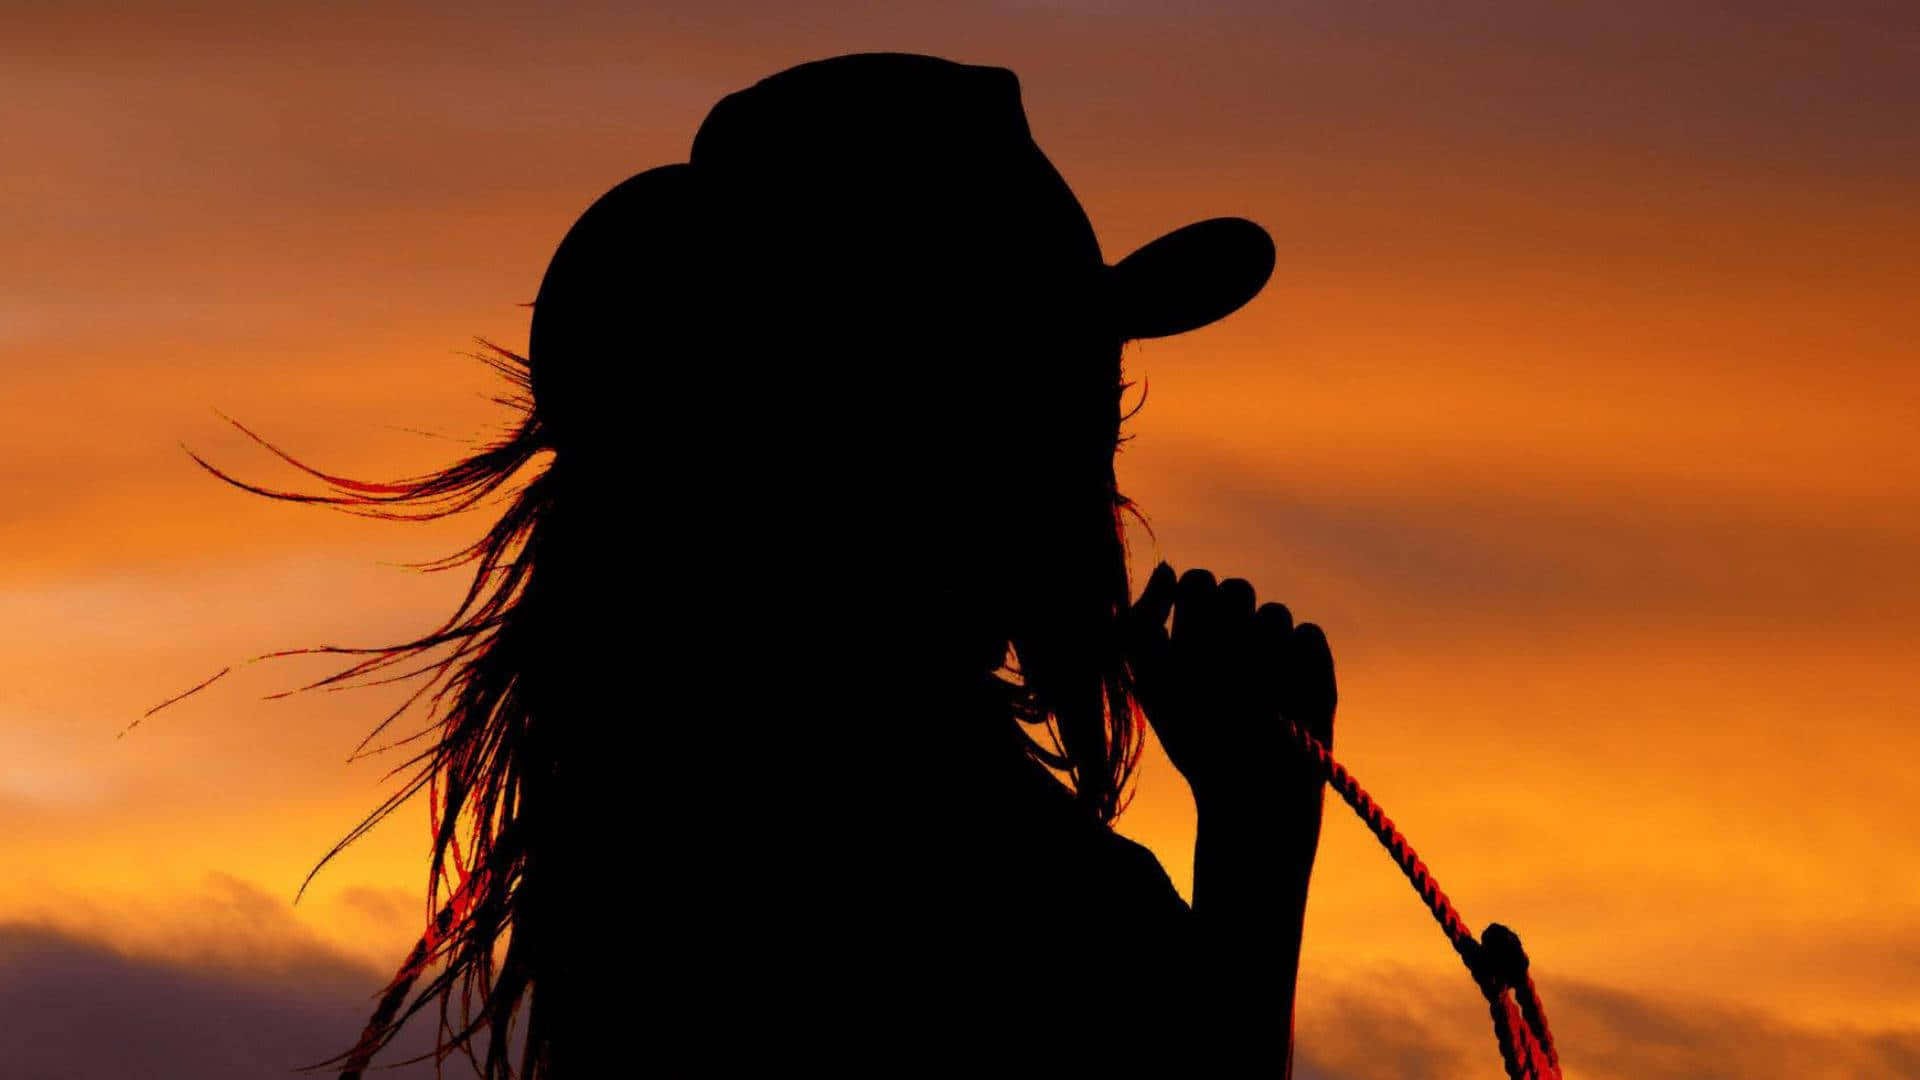 Cowgirl Aesthetic Black Shadowy Silhouette Wallpaper